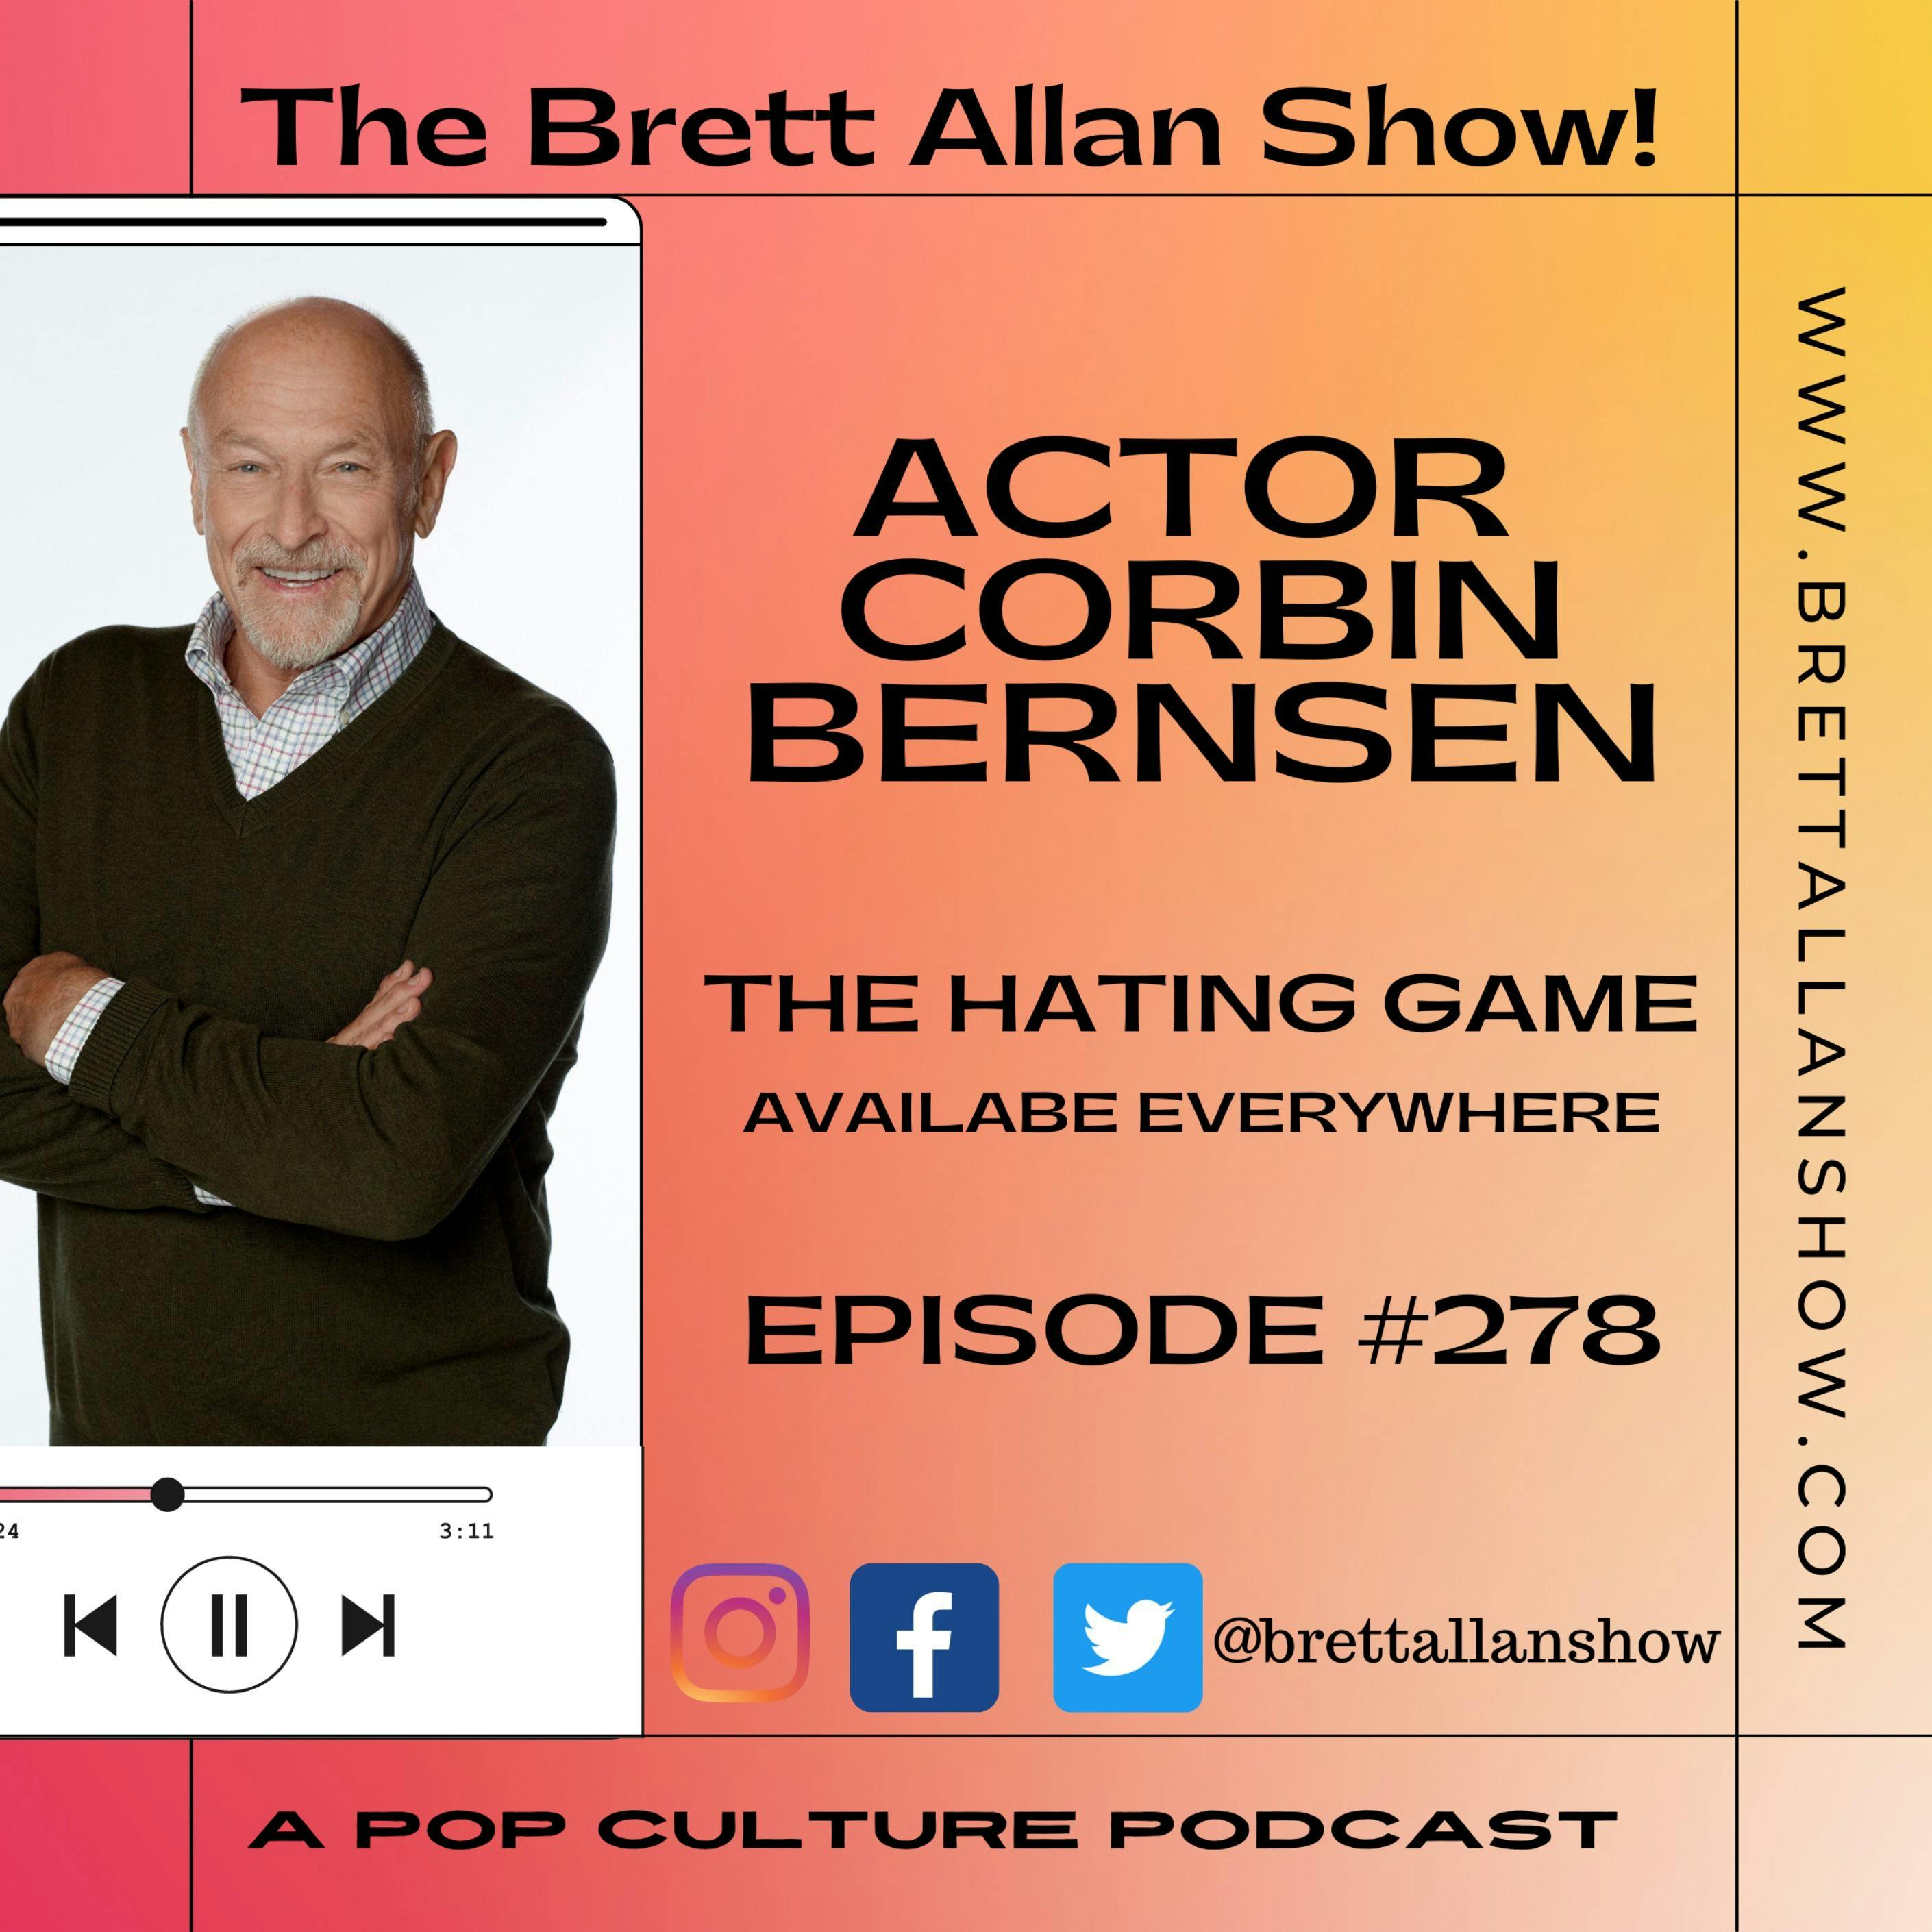 Actor Corbin Bernsen | "The Hating Game" "Major League" "LA Law" and More Image